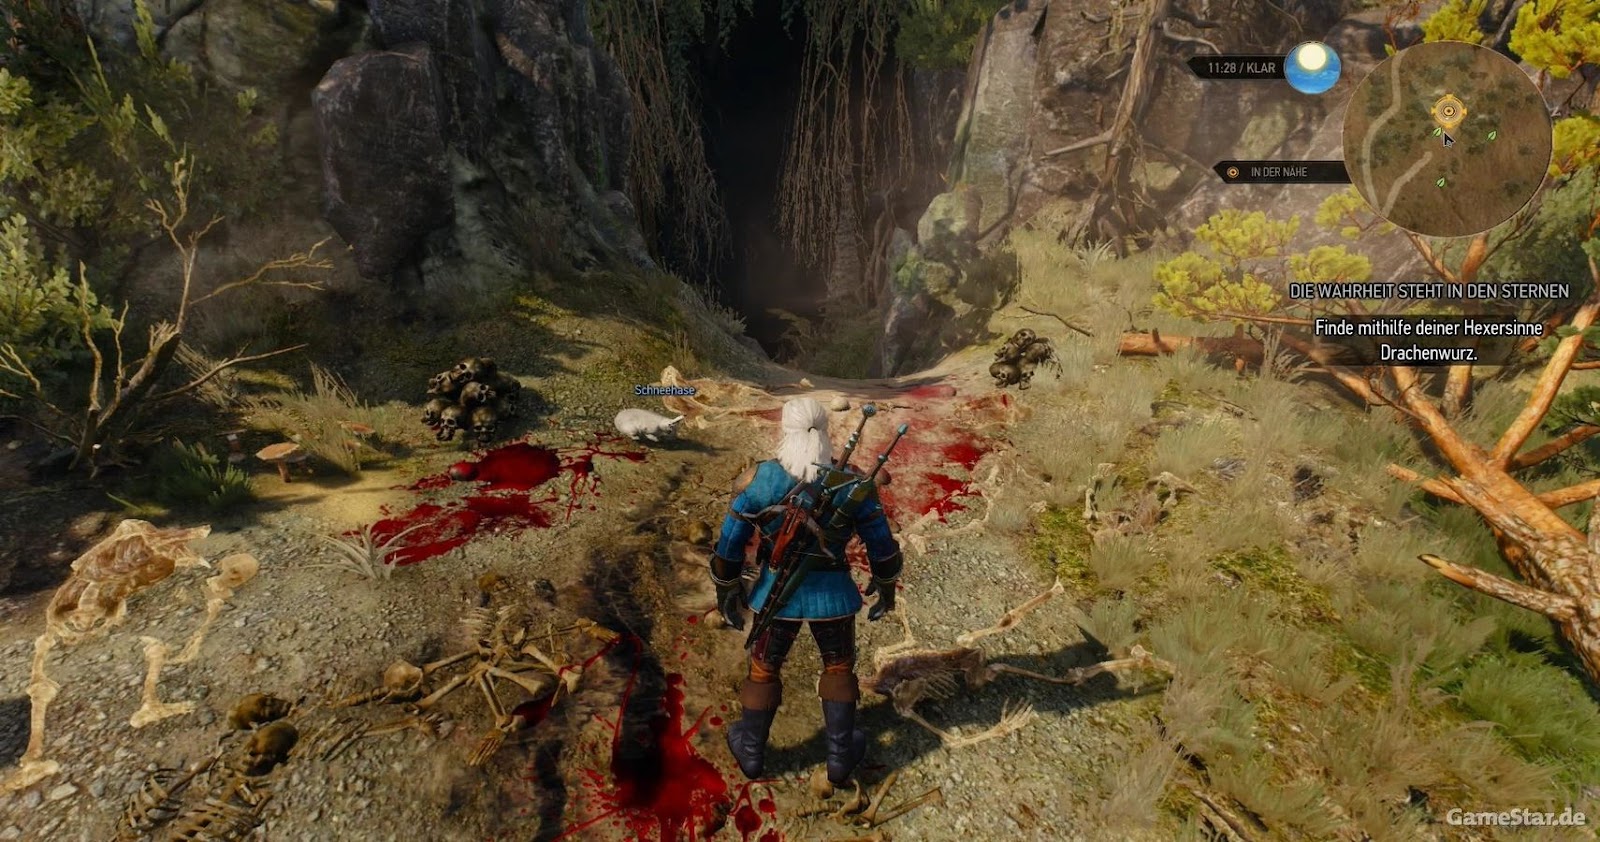 The Witcher 3 Has An Awesome Monty Python Easter Egg